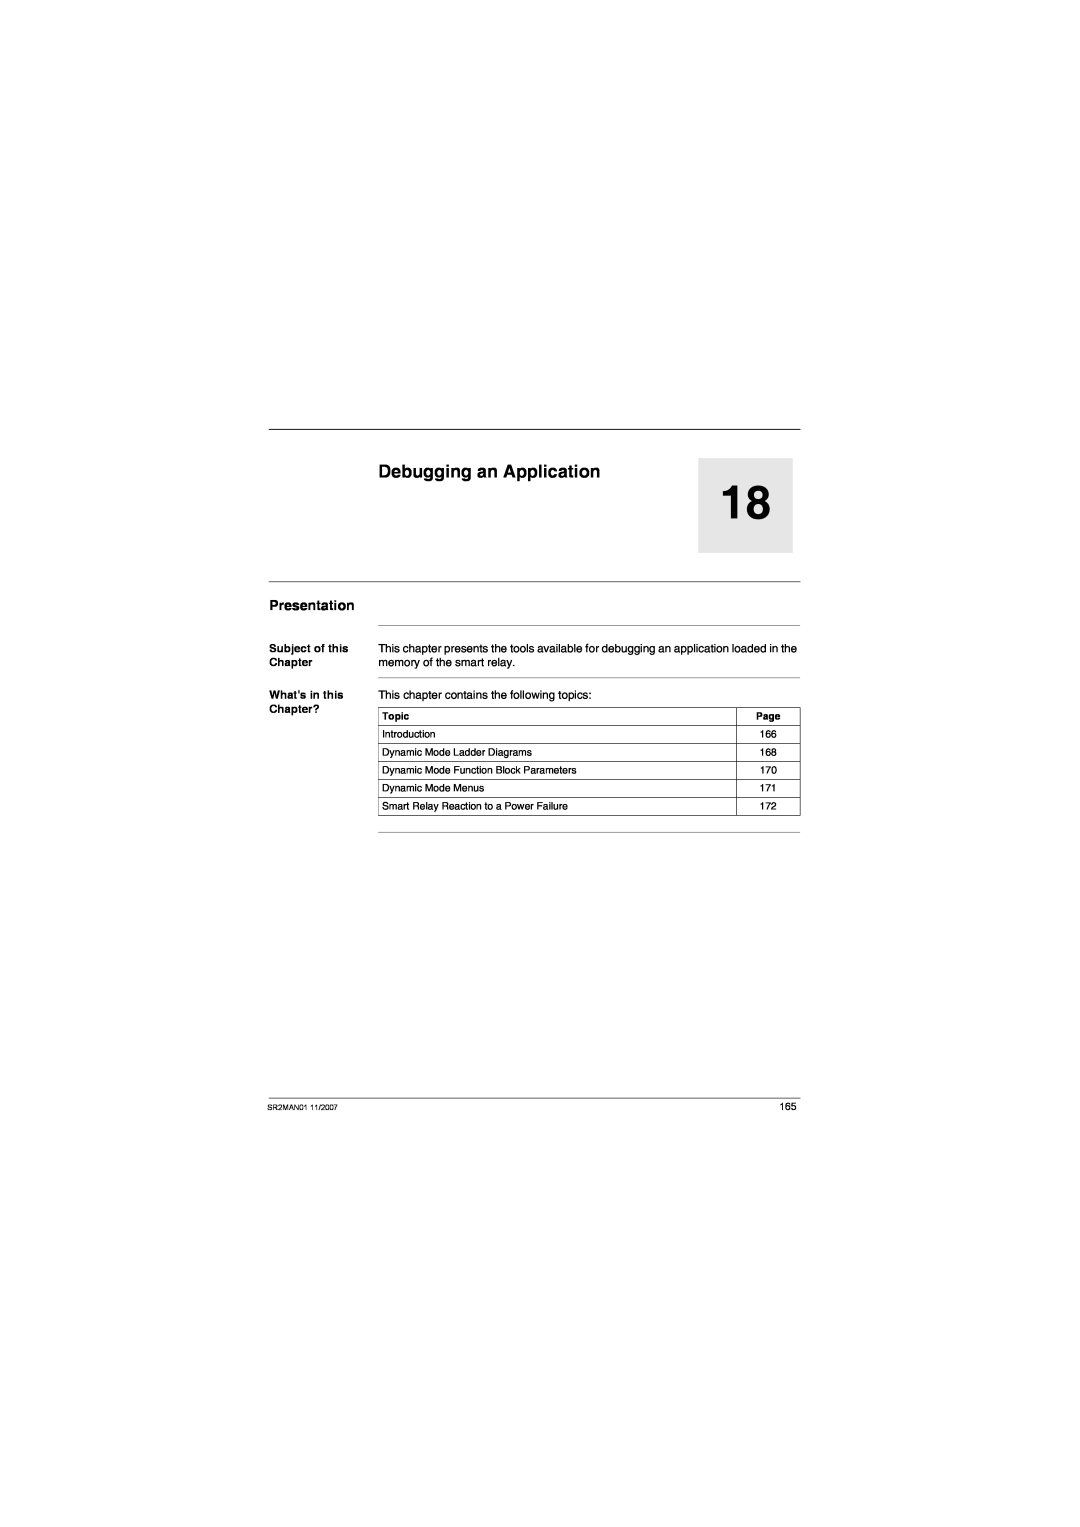 Schneider Electric SR2MAN01 Debugging an Application, Presentation, Subject of this Chapter Whats in this Chapter?, Topic 